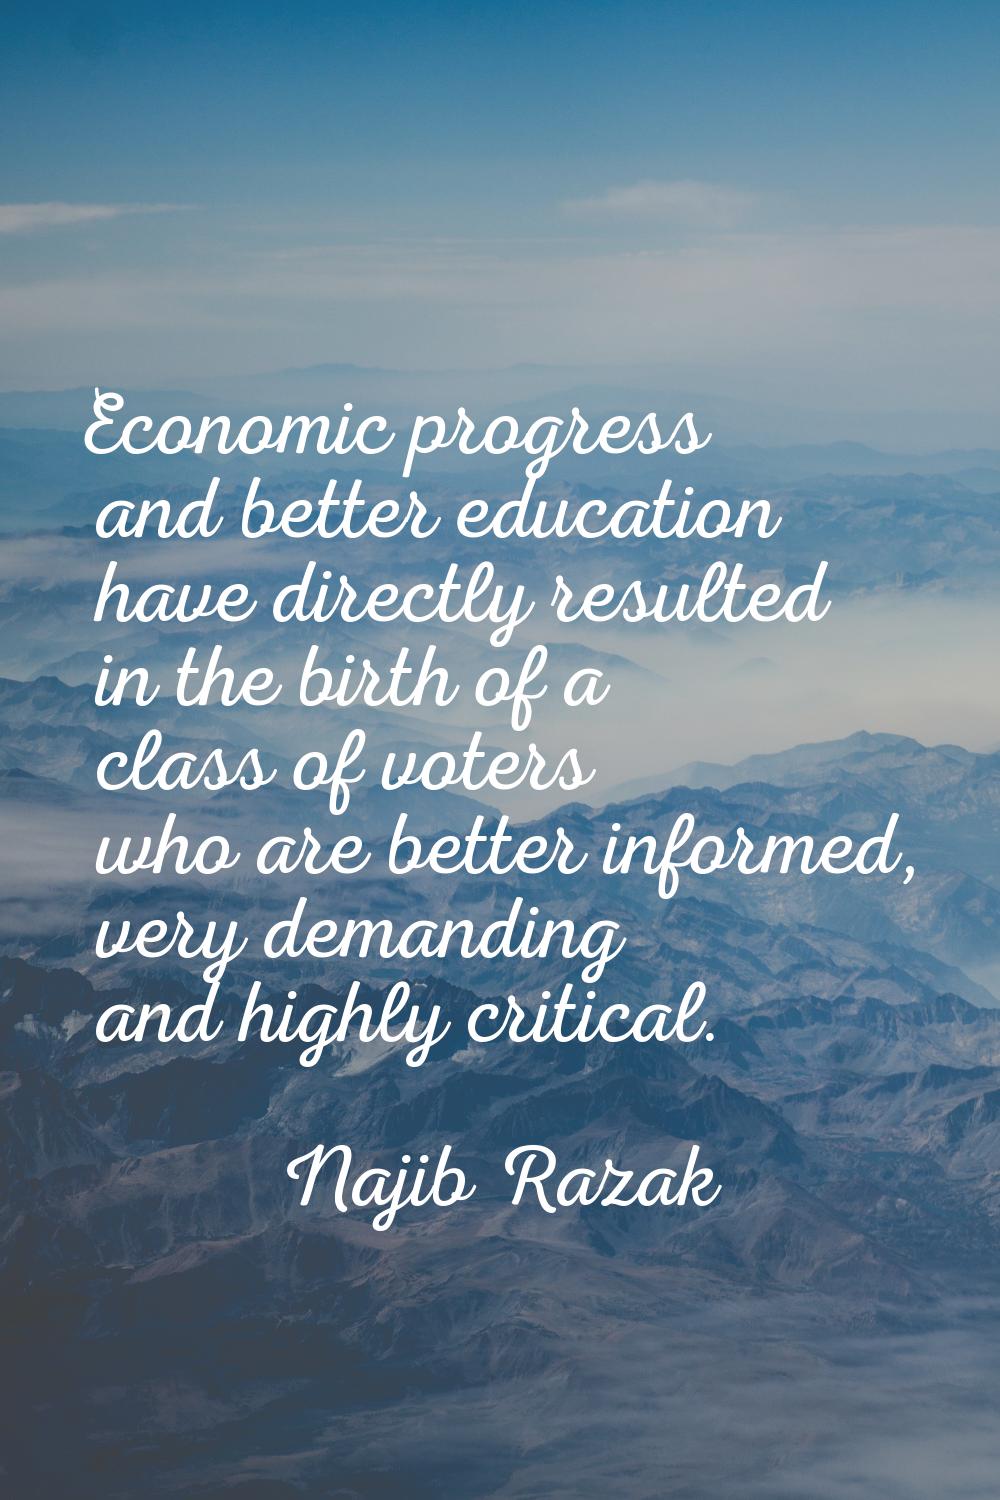 Economic progress and better education have directly resulted in the birth of a class of voters who